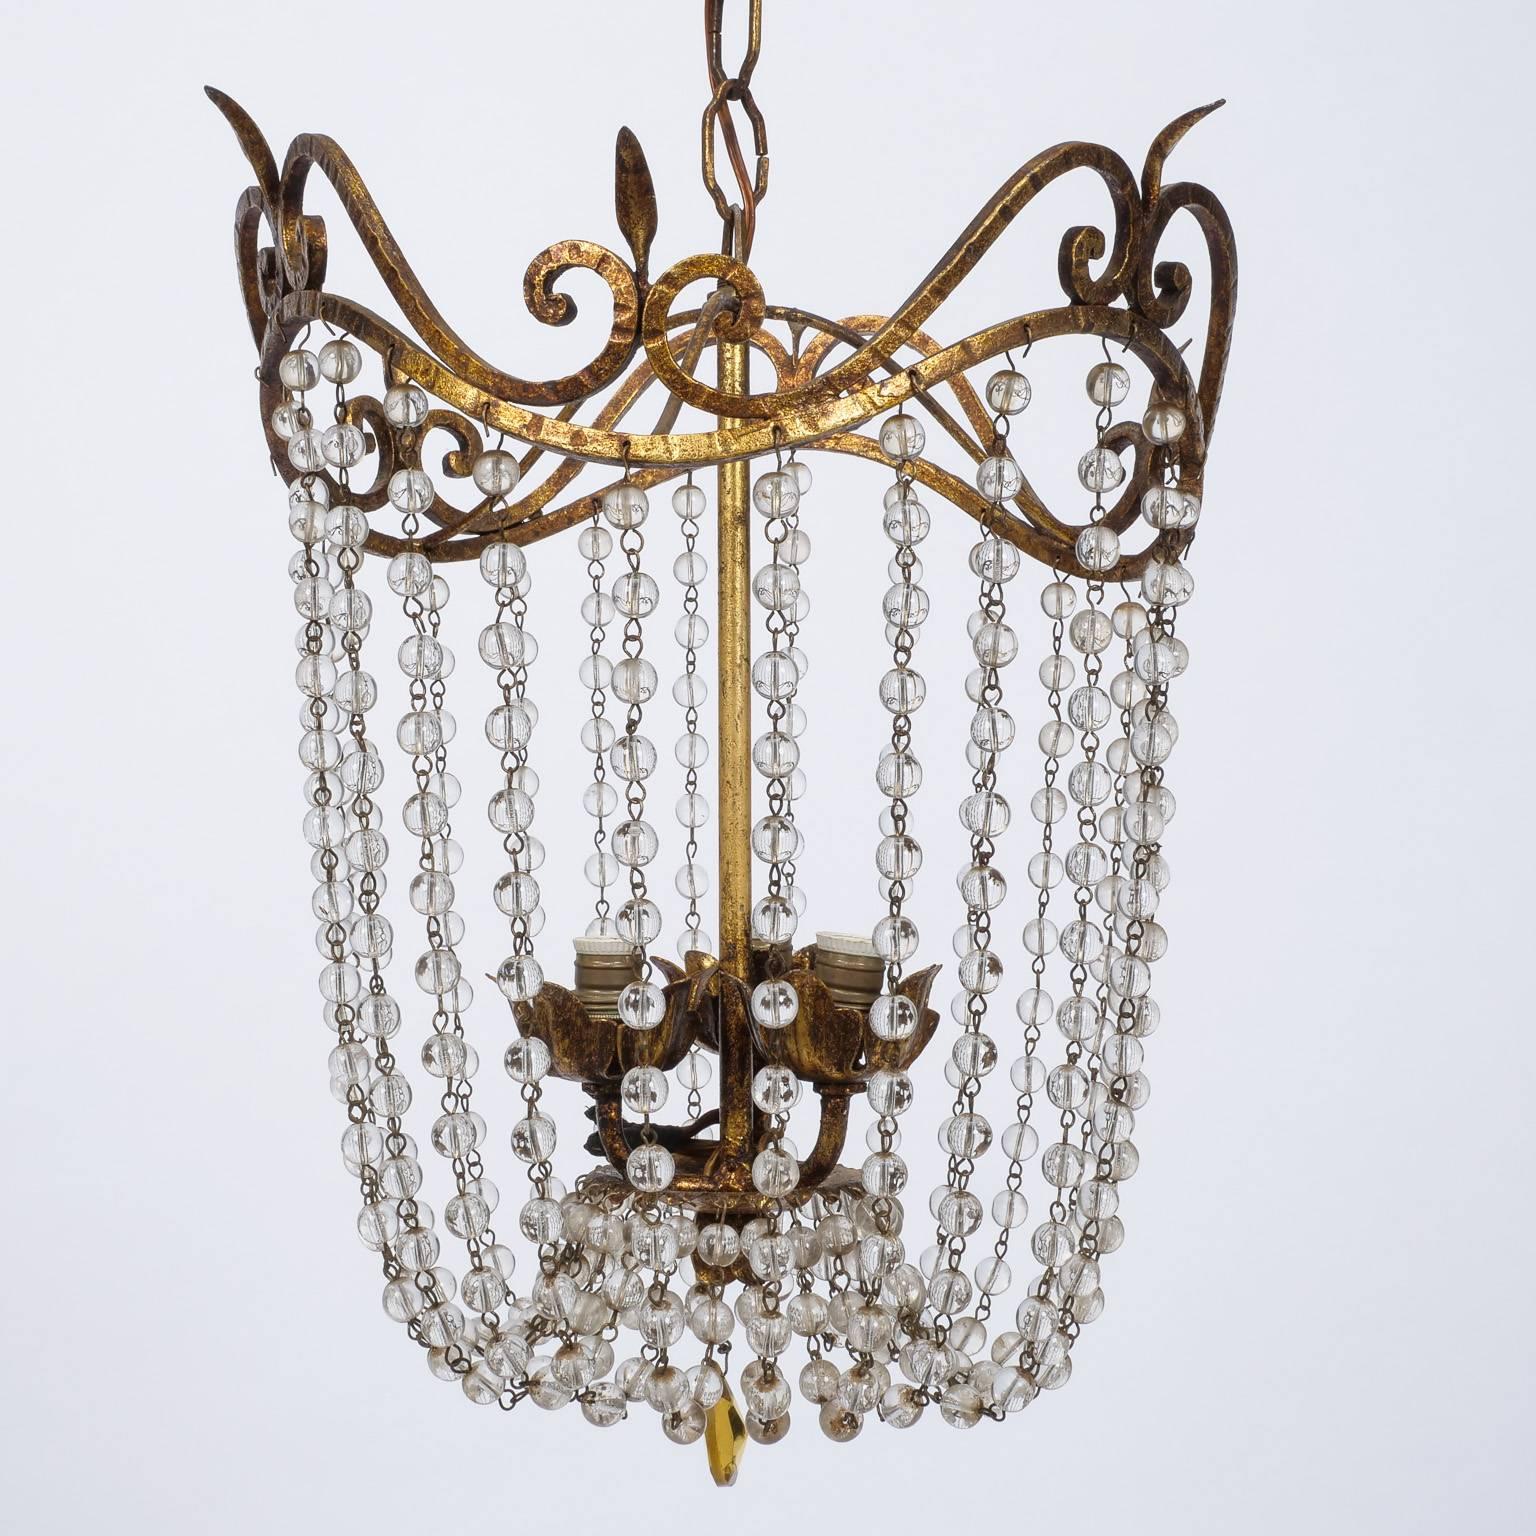 Era Empire style chandelier features a gilded iron frame draped with clear crystal beads, three internal candelabra size sockets and a pale amber faceted crystal drop. Subtle and elegant, this piece would work well in a powder room or bedroom.